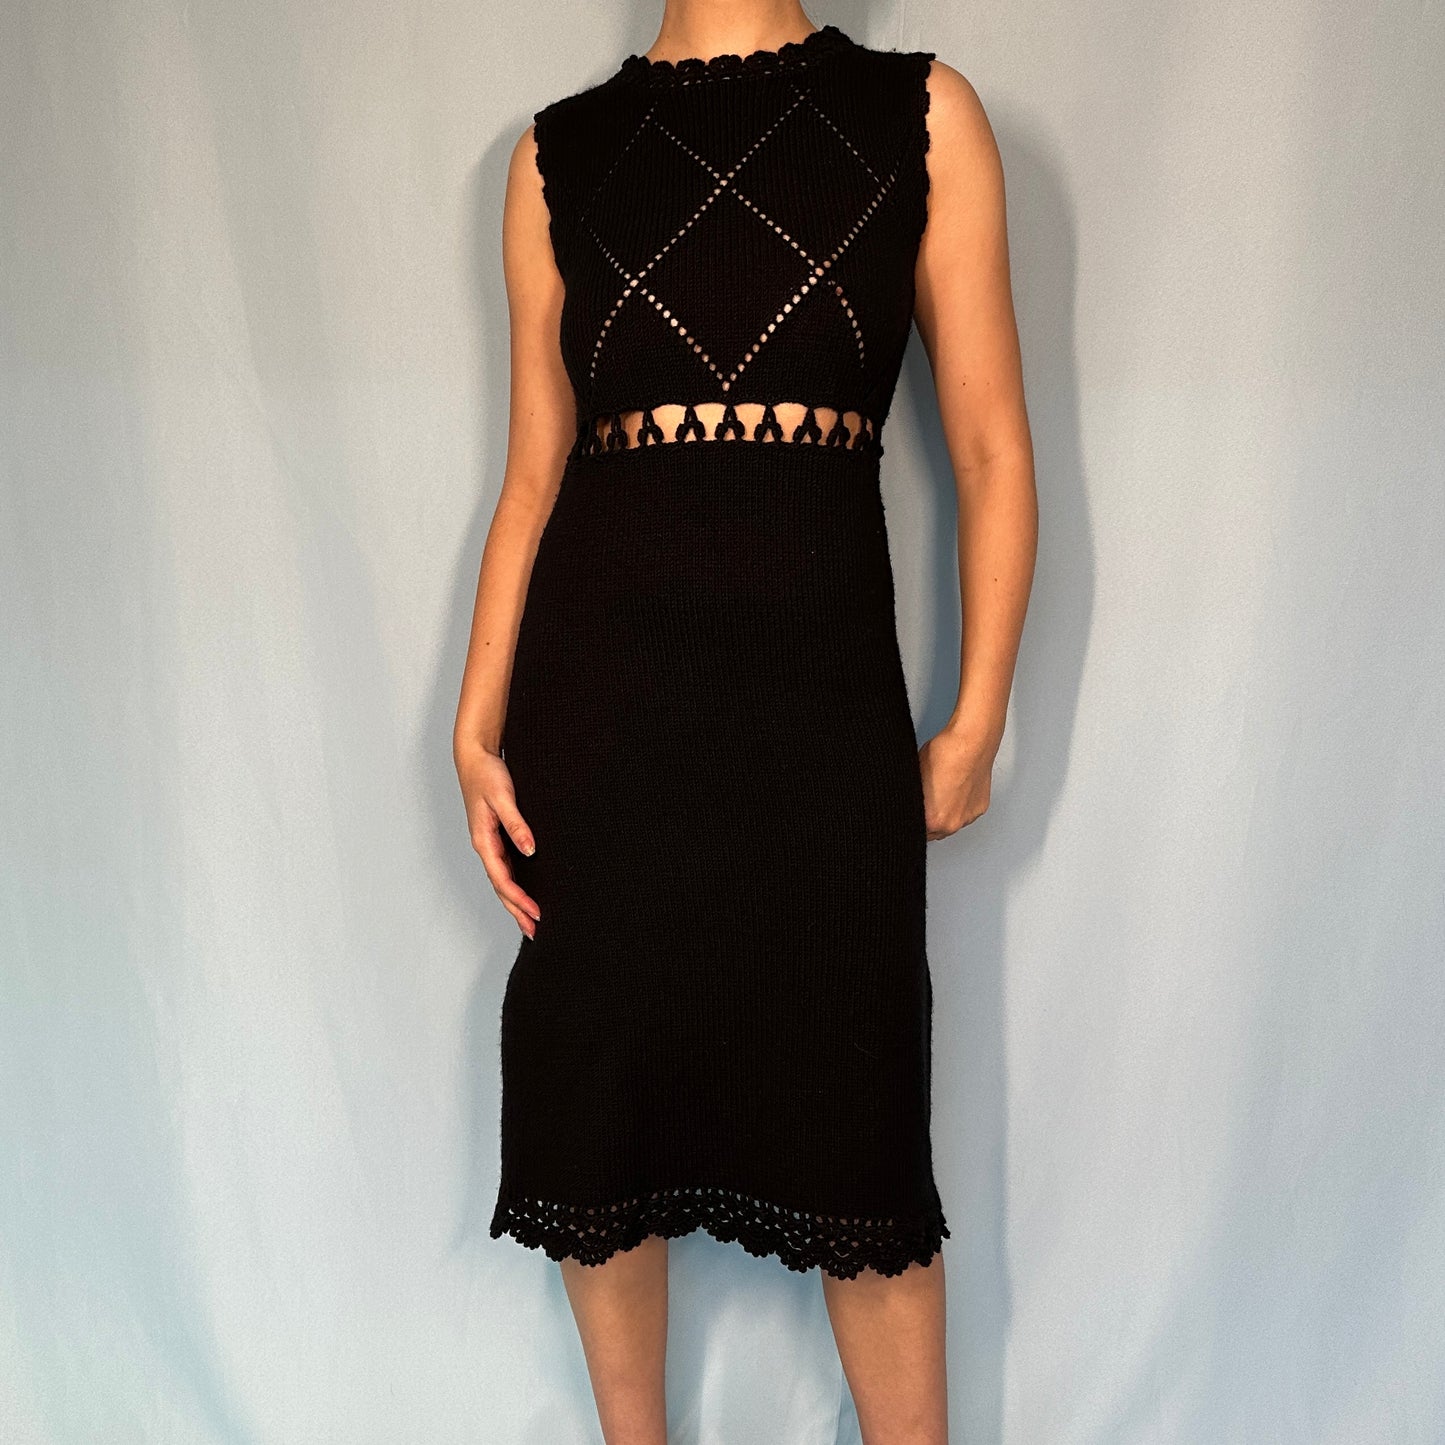 Anna Sui Black Cut Out Knitted Dress